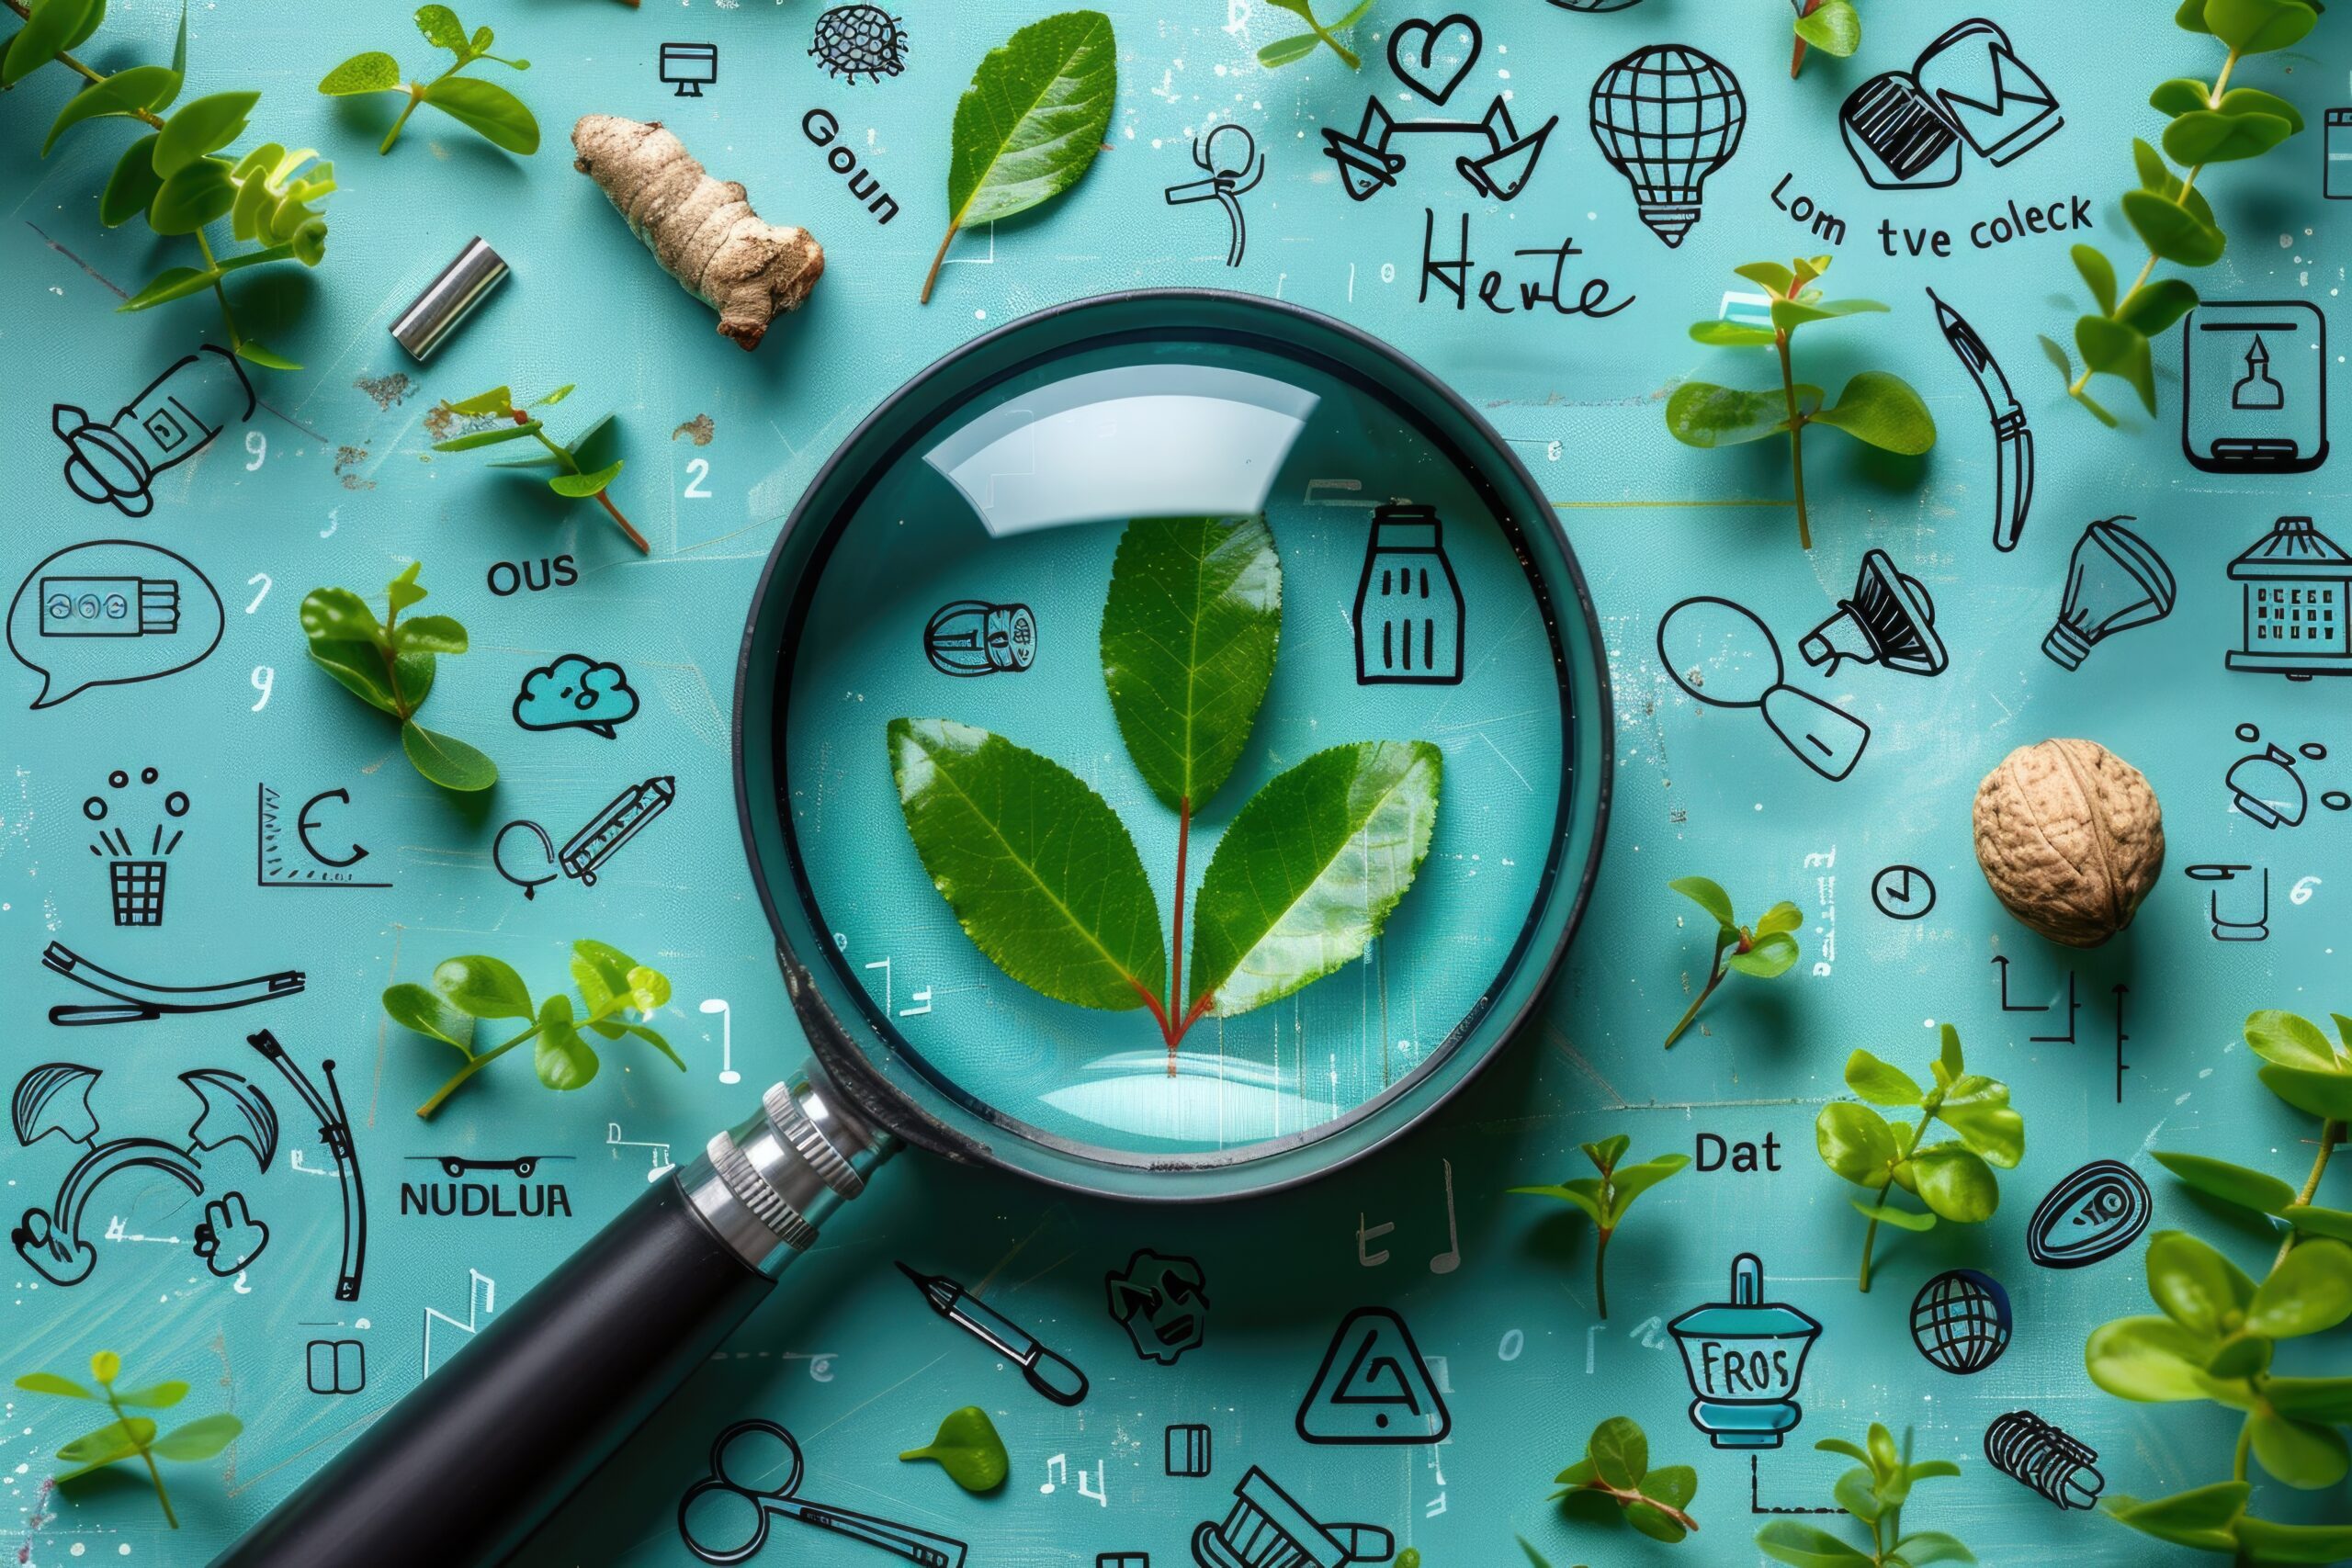 The magnifying glass and green leaves on the desktop